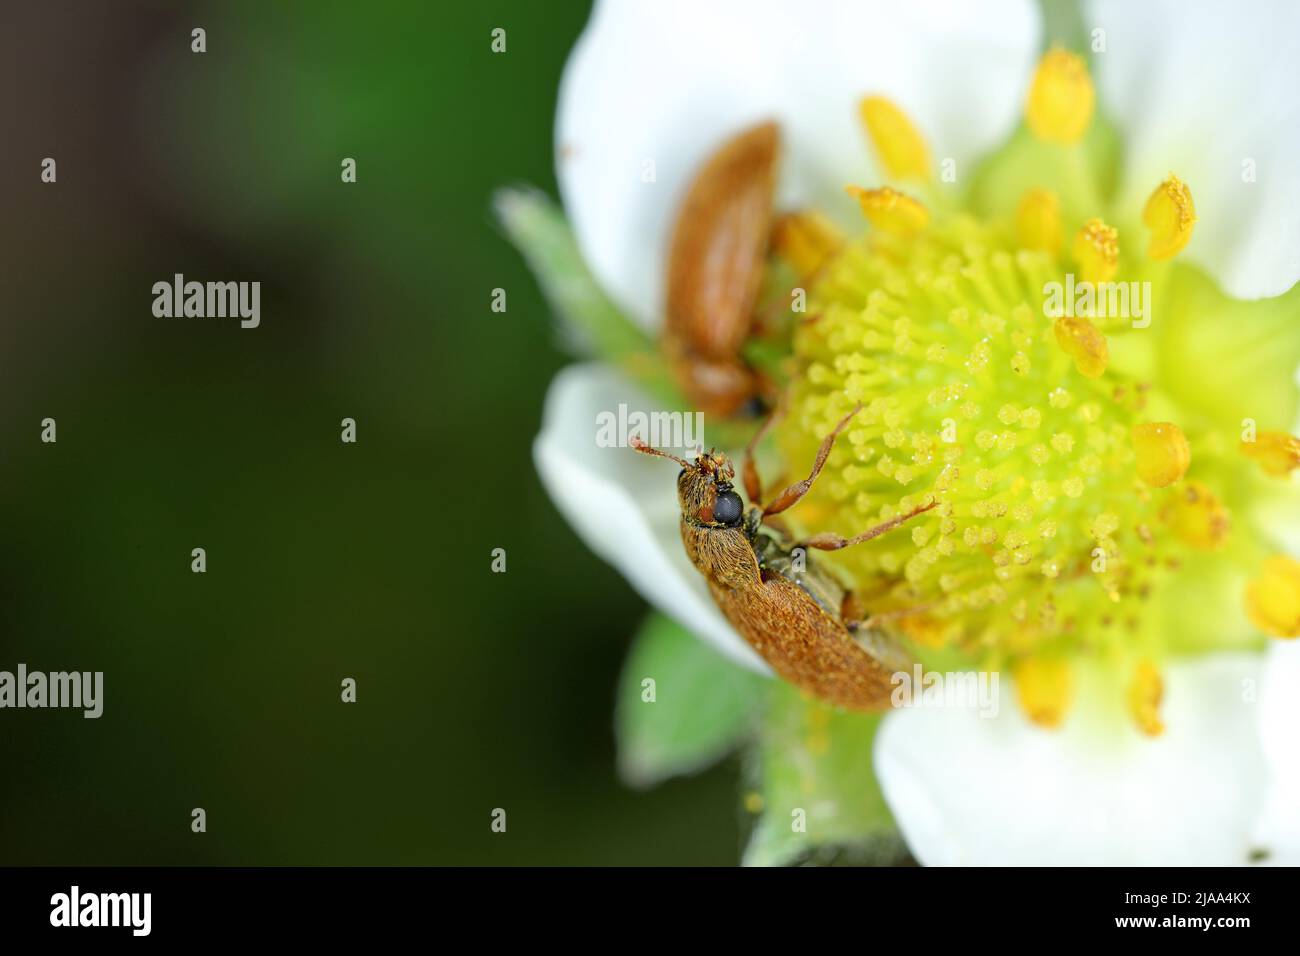 The raspberry beetle (Byturus tomentosus) on damaged flower buds of strawberries. It is a beetles from fruitworm family Byturidae a major pest affecti Stock Photo